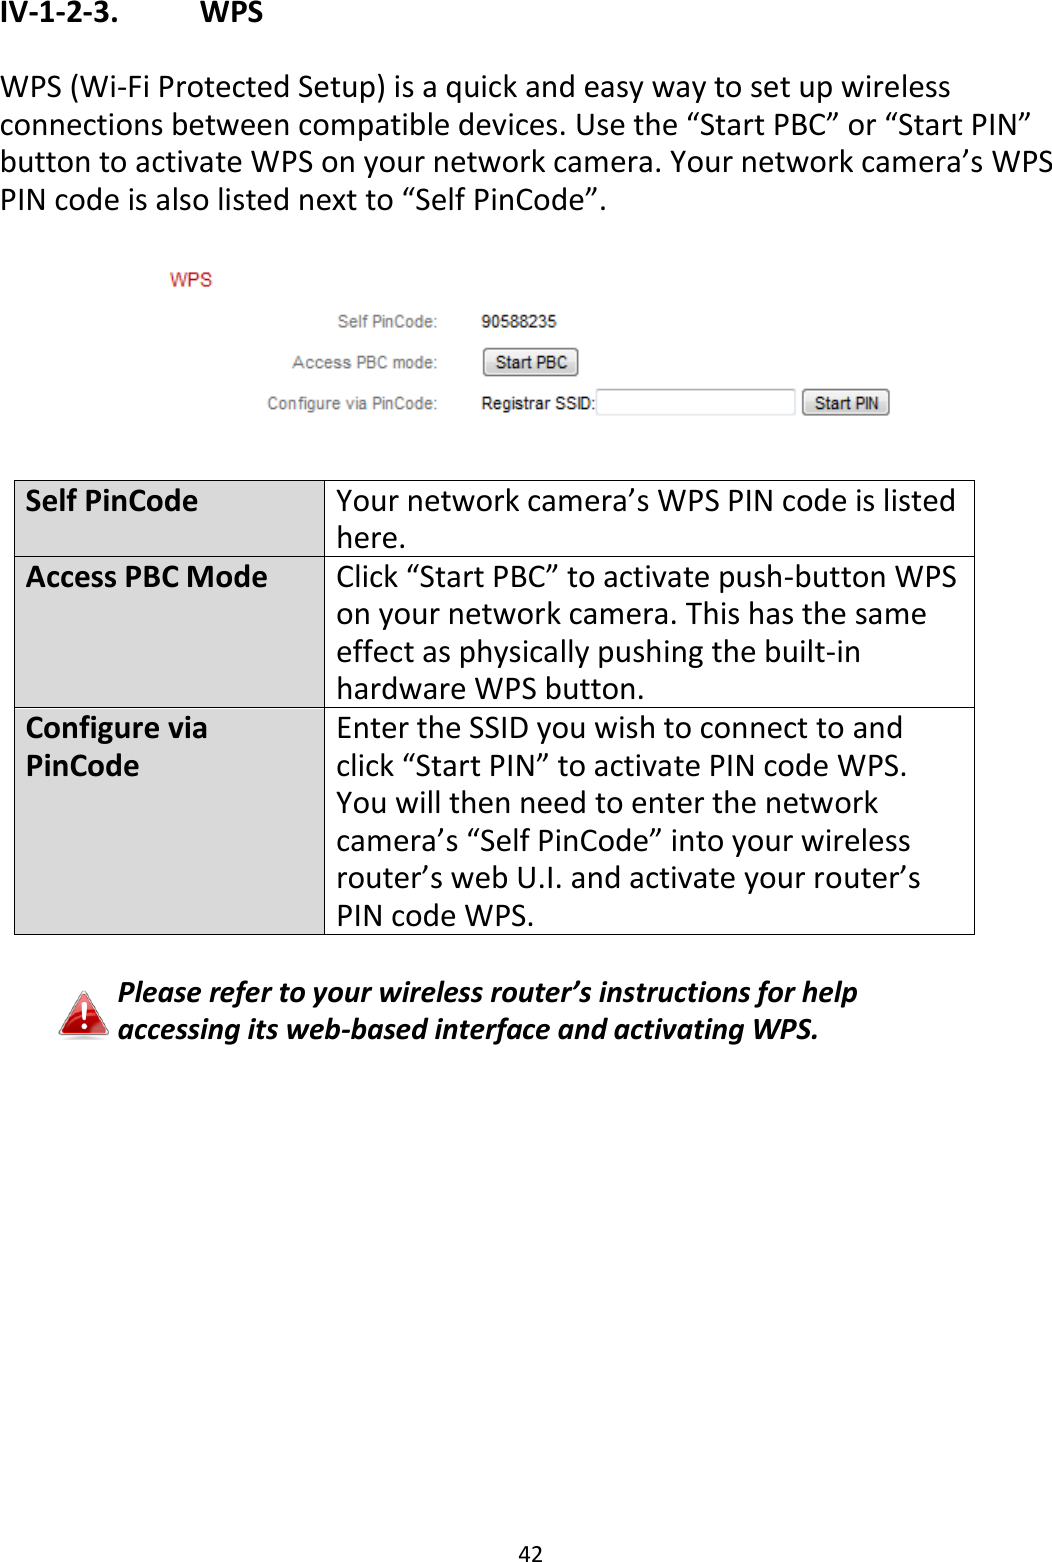 42  IV-1-2-3.    WPS  WPS (Wi-Fi Protected Setup) is a quick and easy way to set up wireless connections between compatible devices. Use the “Start PBC” or “Start PIN” button to activate WPS on your network camera. Your network camera’s WPS PIN code is also listed next to “Self PinCode”.    Self PinCode Your network camera’s WPS PIN code is listed here. Access PBC Mode Click “Start PBC” to activate push-button WPS on your network camera. This has the same effect as physically pushing the built-in hardware WPS button. Configure via PinCode Enter the SSID you wish to connect to and click “Start PIN” to activate PIN code WPS. You will then need to enter the network camera’s “Self PinCode” into your wireless router’s web U.I. and activate your router’s PIN code WPS.  Please refer to your wireless router’s instructions for help accessing its web-based interface and activating WPS.   